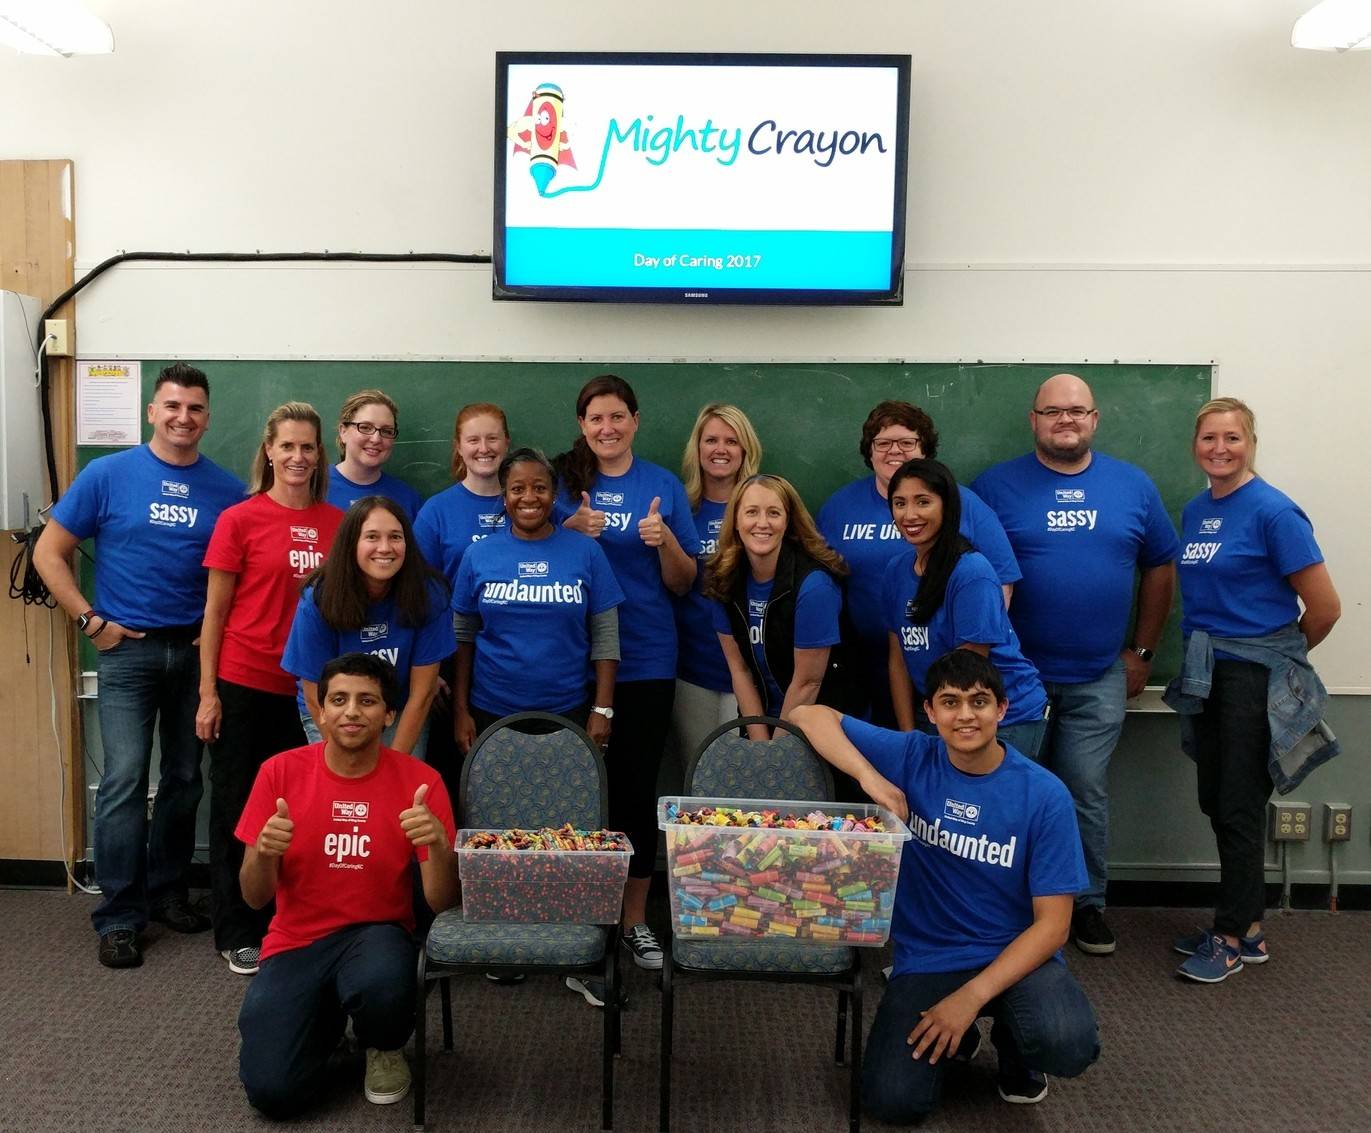 Microsoft employees pair with Mighty Crayon on Day of Caring